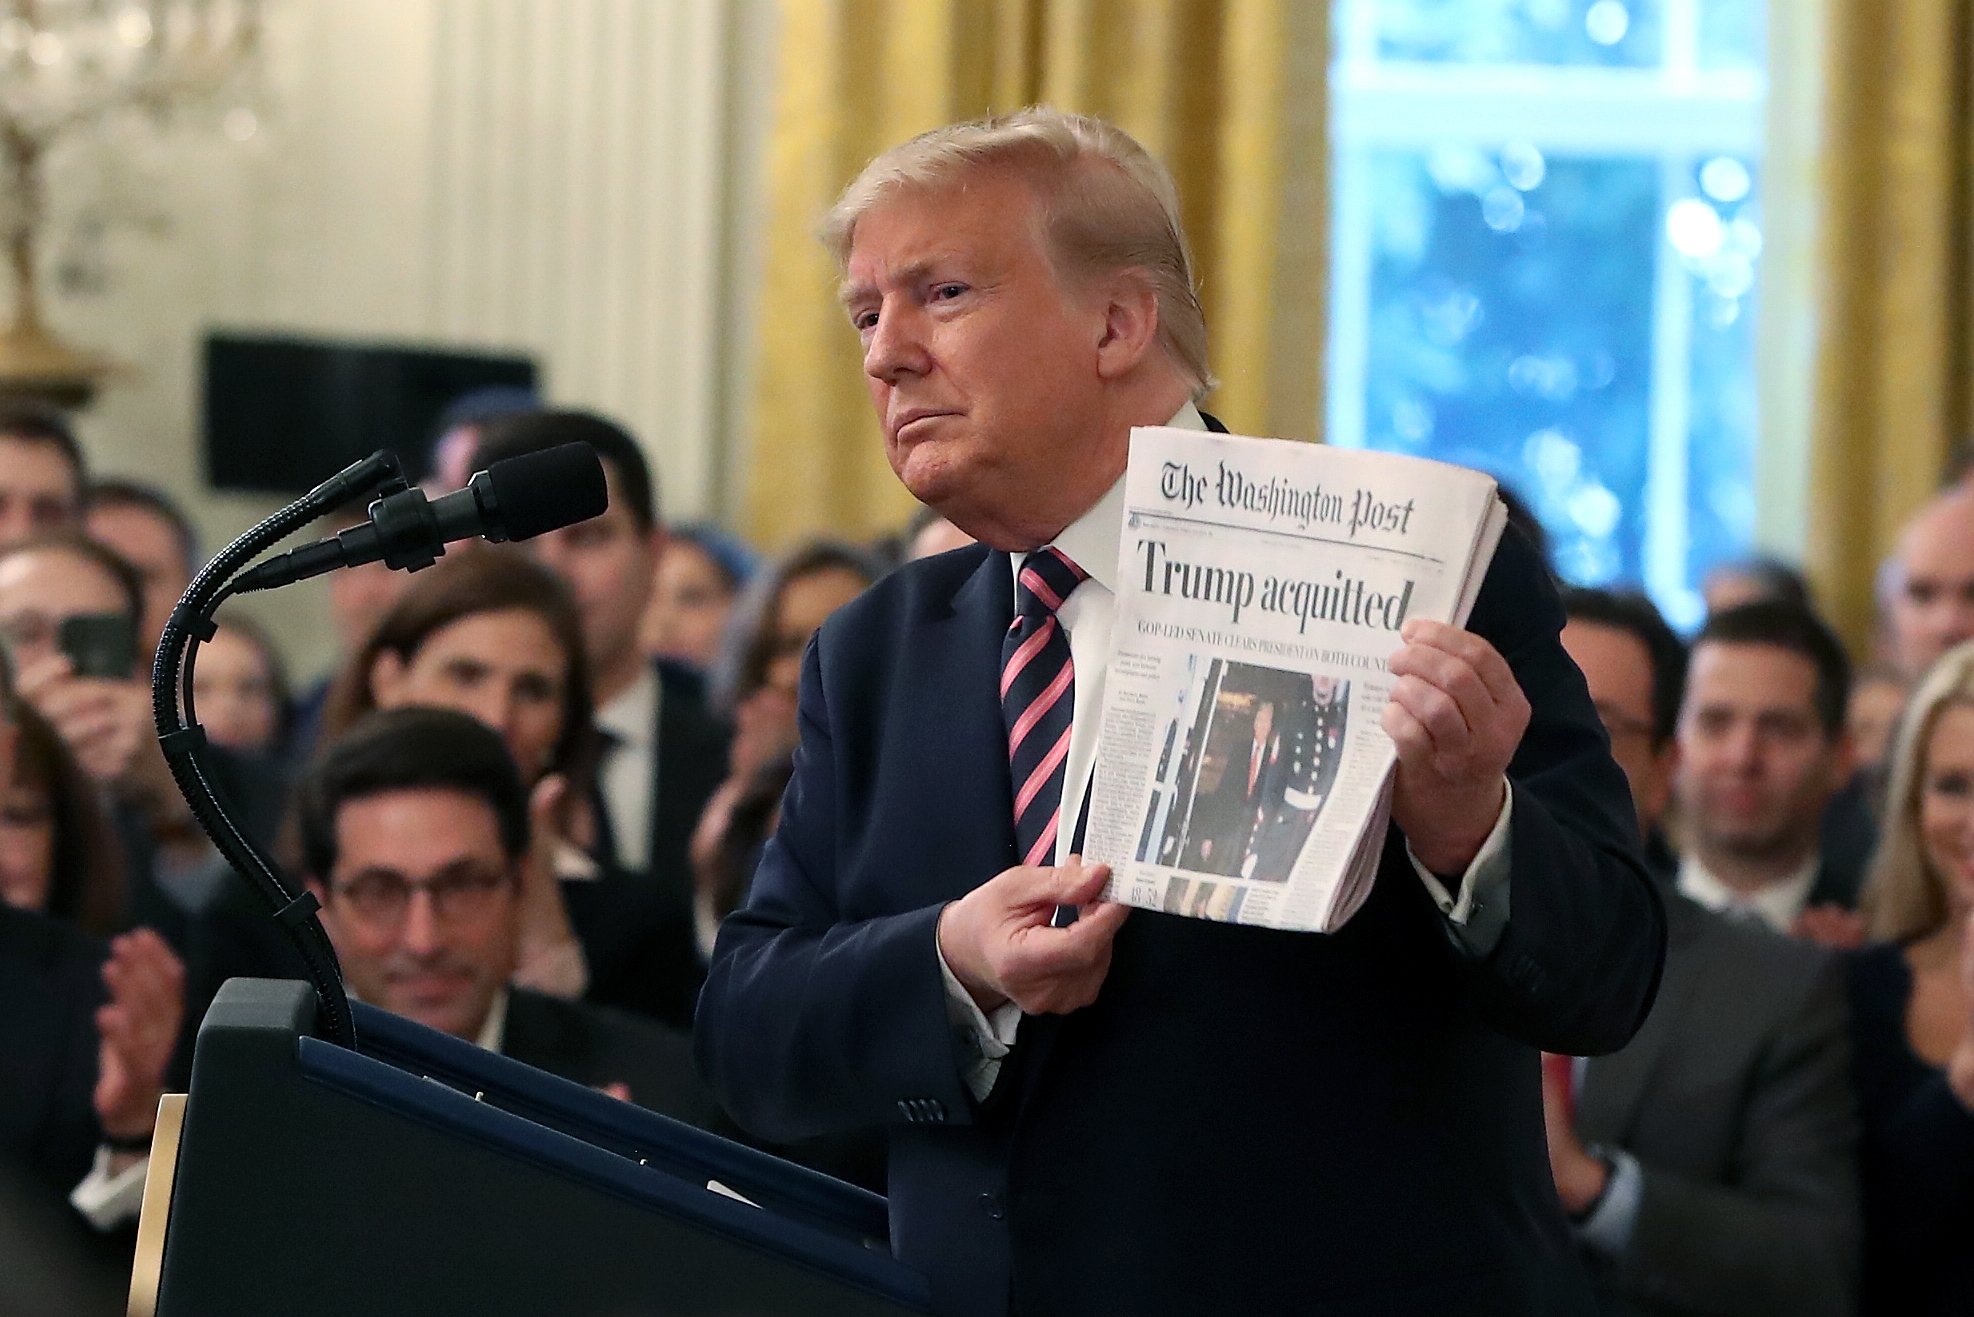 WASHINGTON, DC - FEBRUARY 06: U.S. President Donald Trump holds up a newspaper as he speaks one day after the U.S. Senate acquitted on two articles of impeachment, in the East Room of the White House February 6, 2020 in Washington, DC. After five months of congressional hearings and investigations about President Trump’s dealings with Ukraine, the U.S. Senate formally acquitted the president of charges that he abused his power and obstructed Congress. (Photo by Mark Wilson/Getty Images)